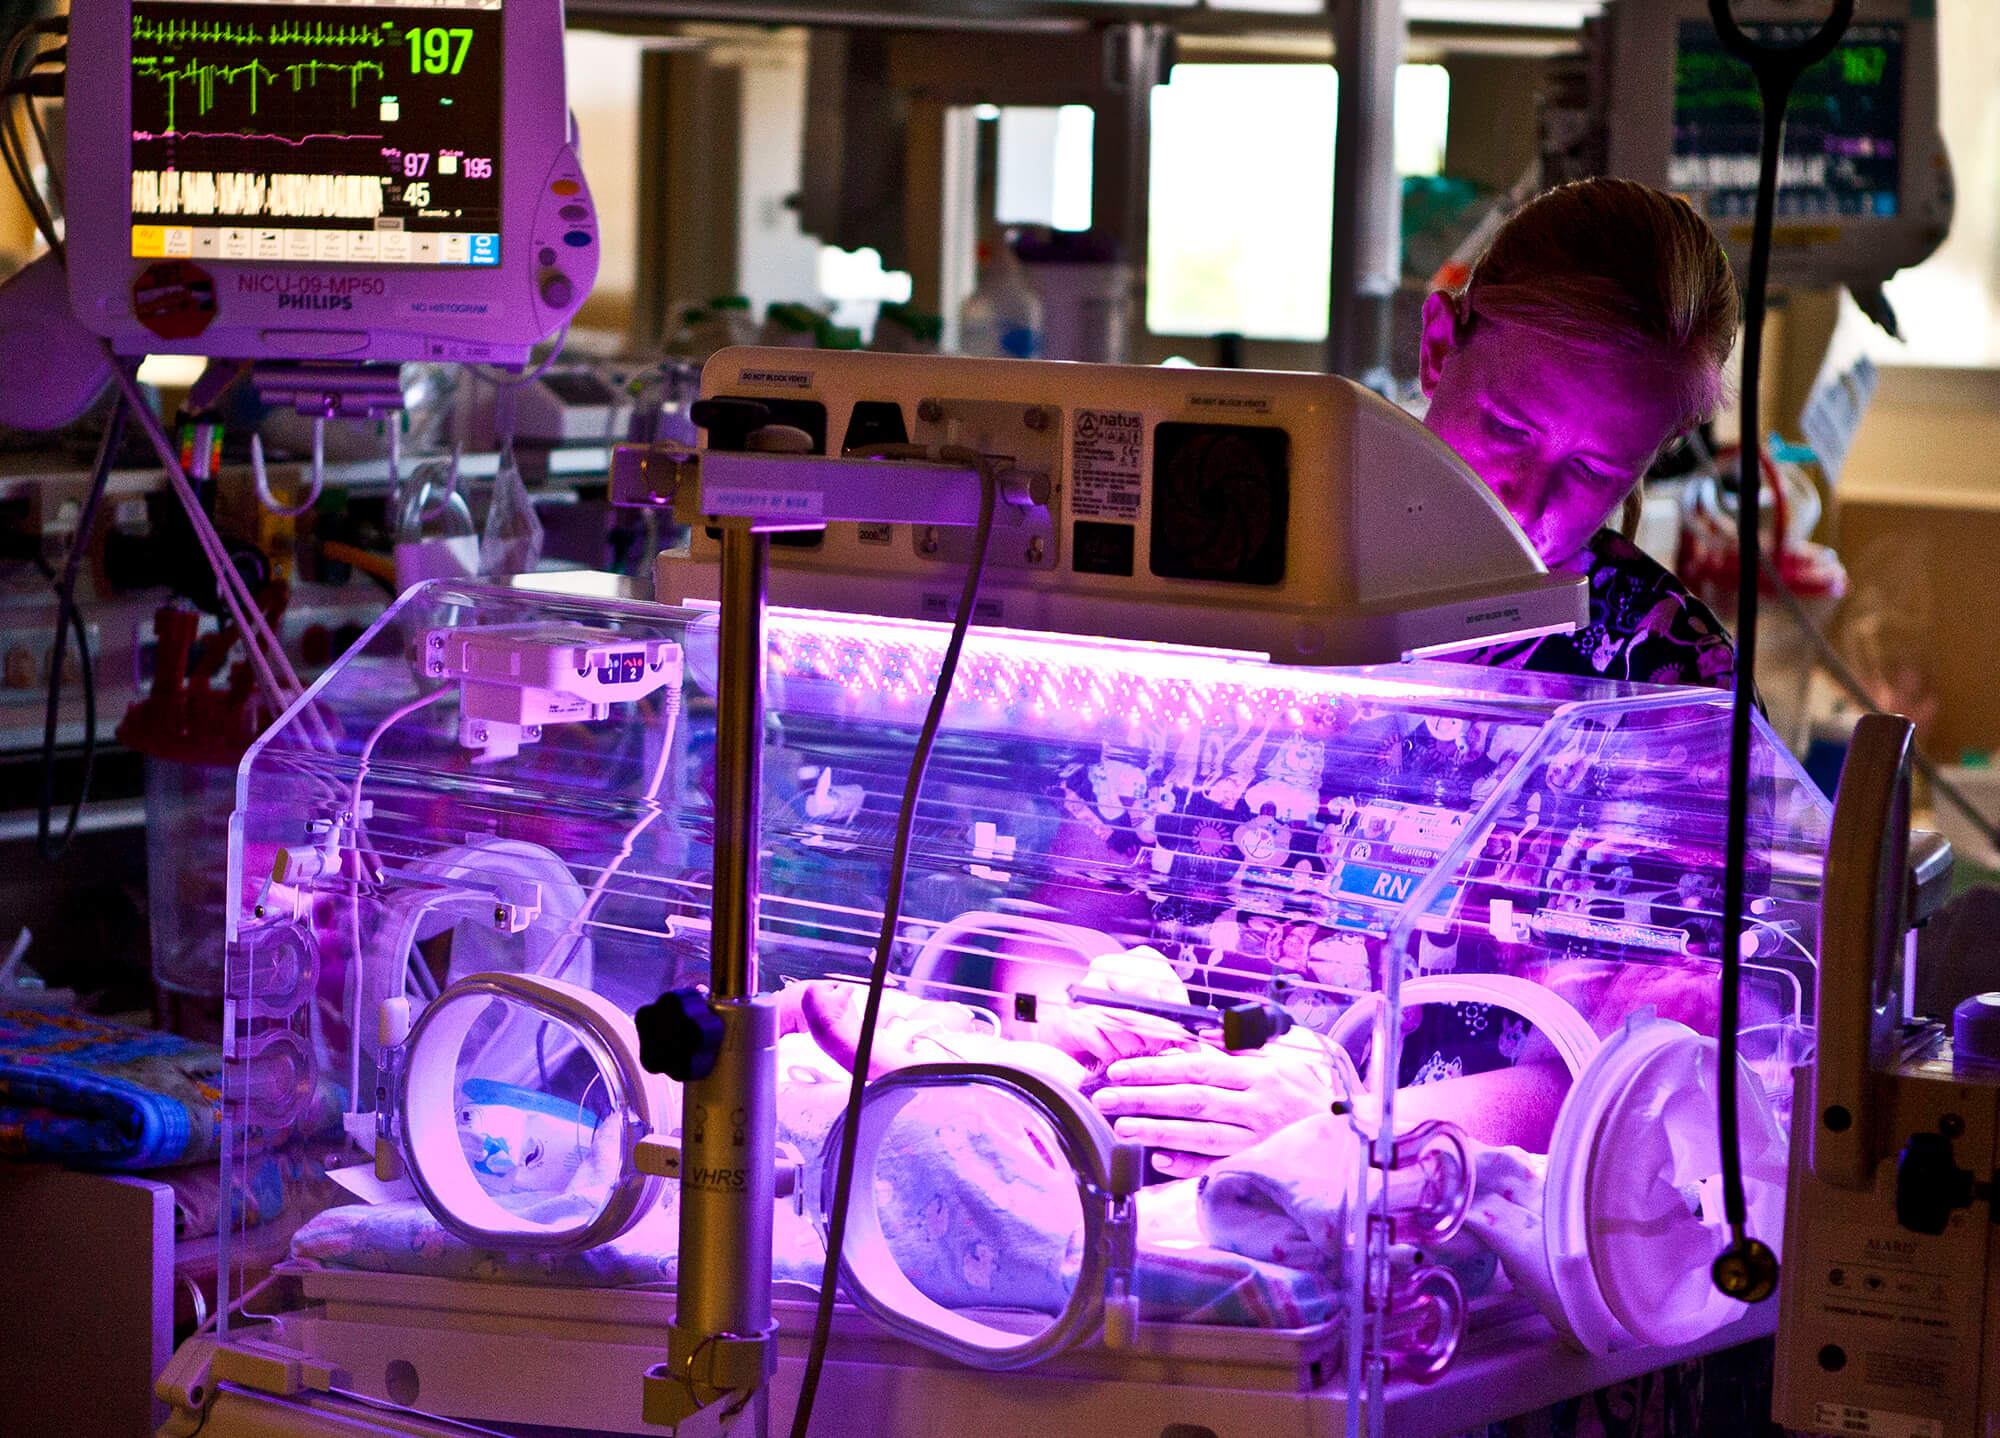 Expansion of the Neonatal Intensive Care Unit